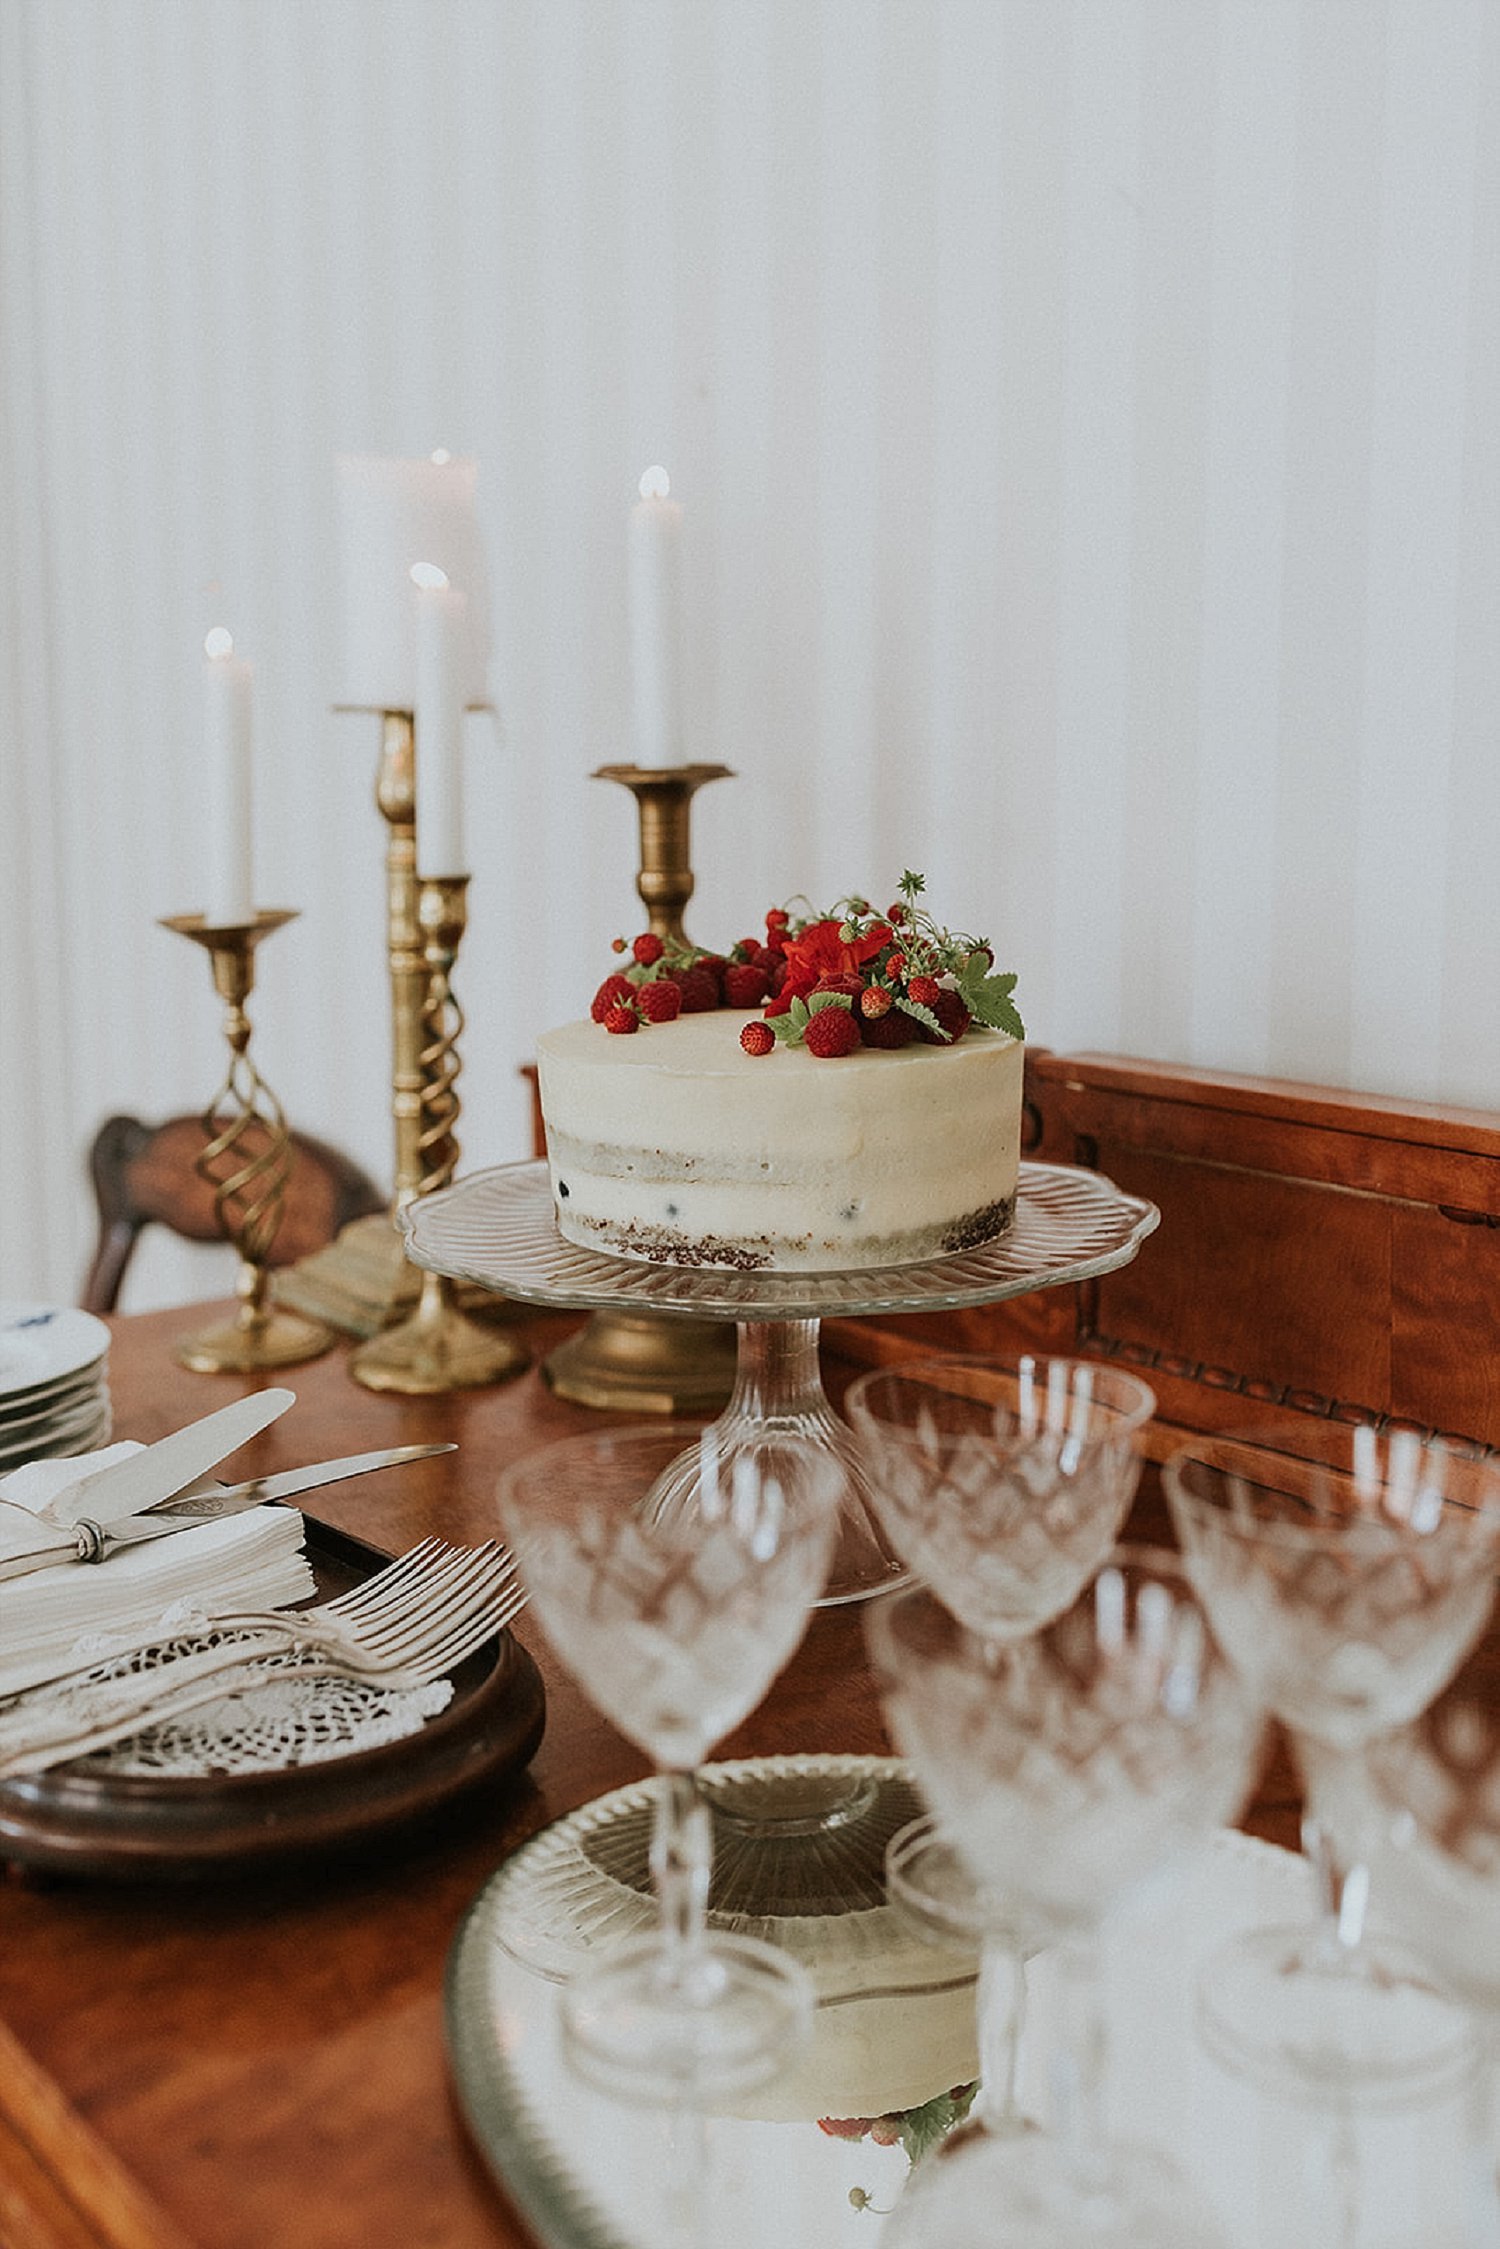 artisanal wedding cake with fruit | full-service destination wedding | get married in Denmark | Aero Island | Danish Island Weddings | Denmark wedding planners and venue